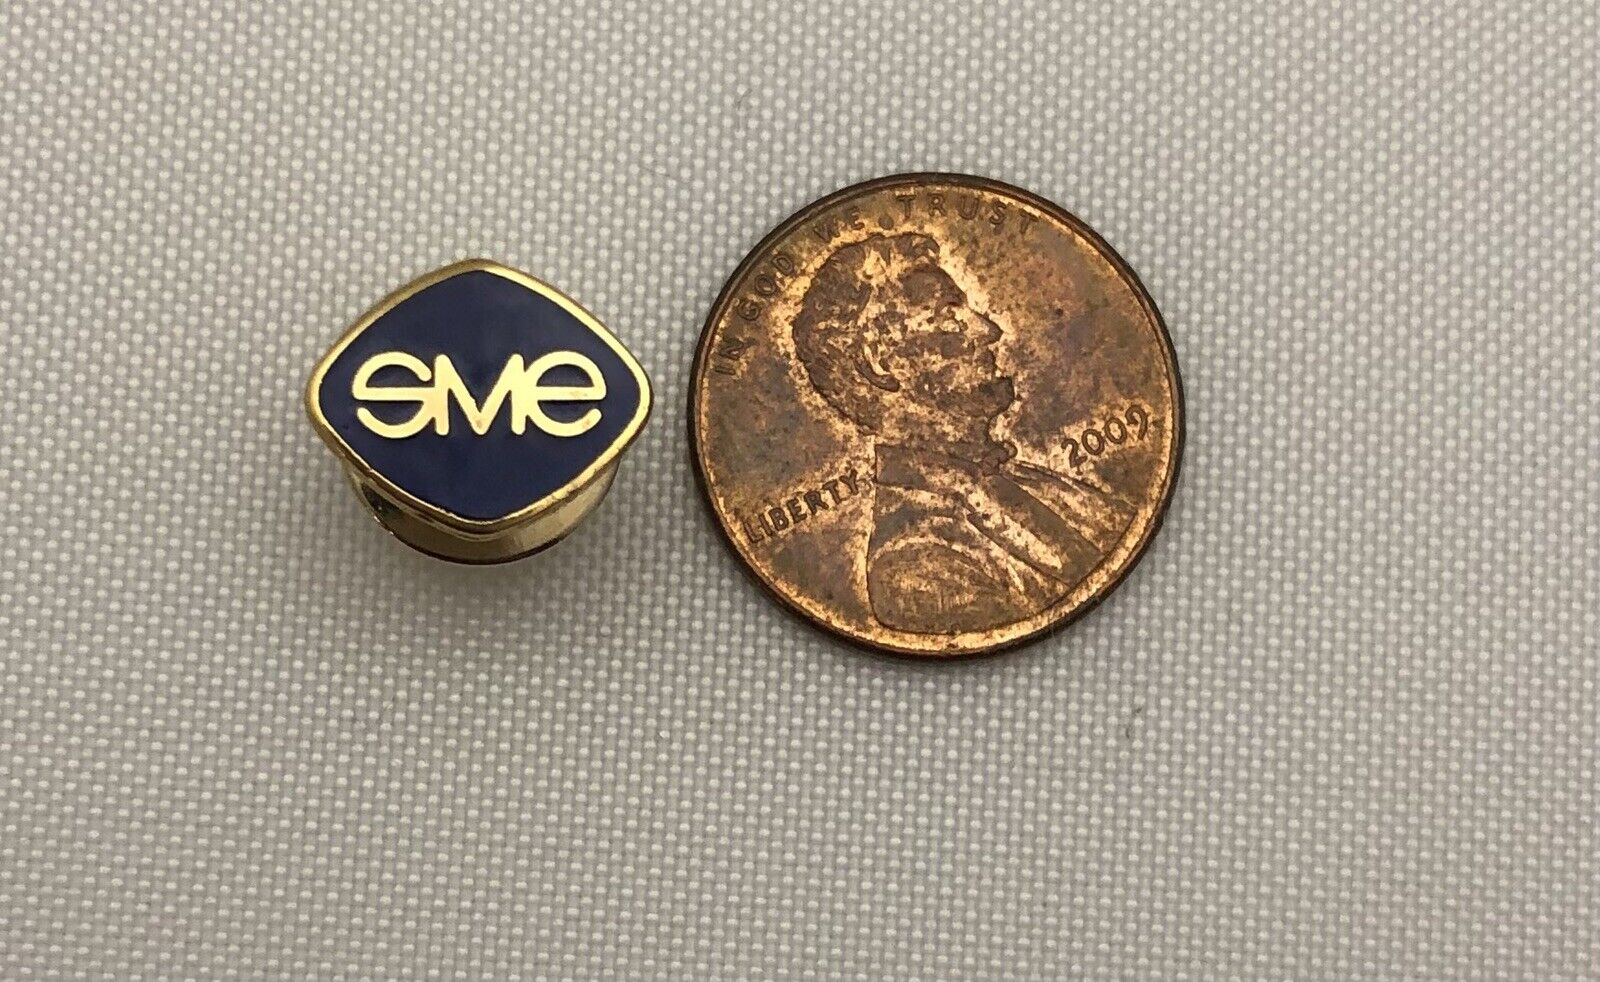 Vintage SME (Society of Manufacturing Engineers) Tie Tack / Lapel Pin-Excellent!